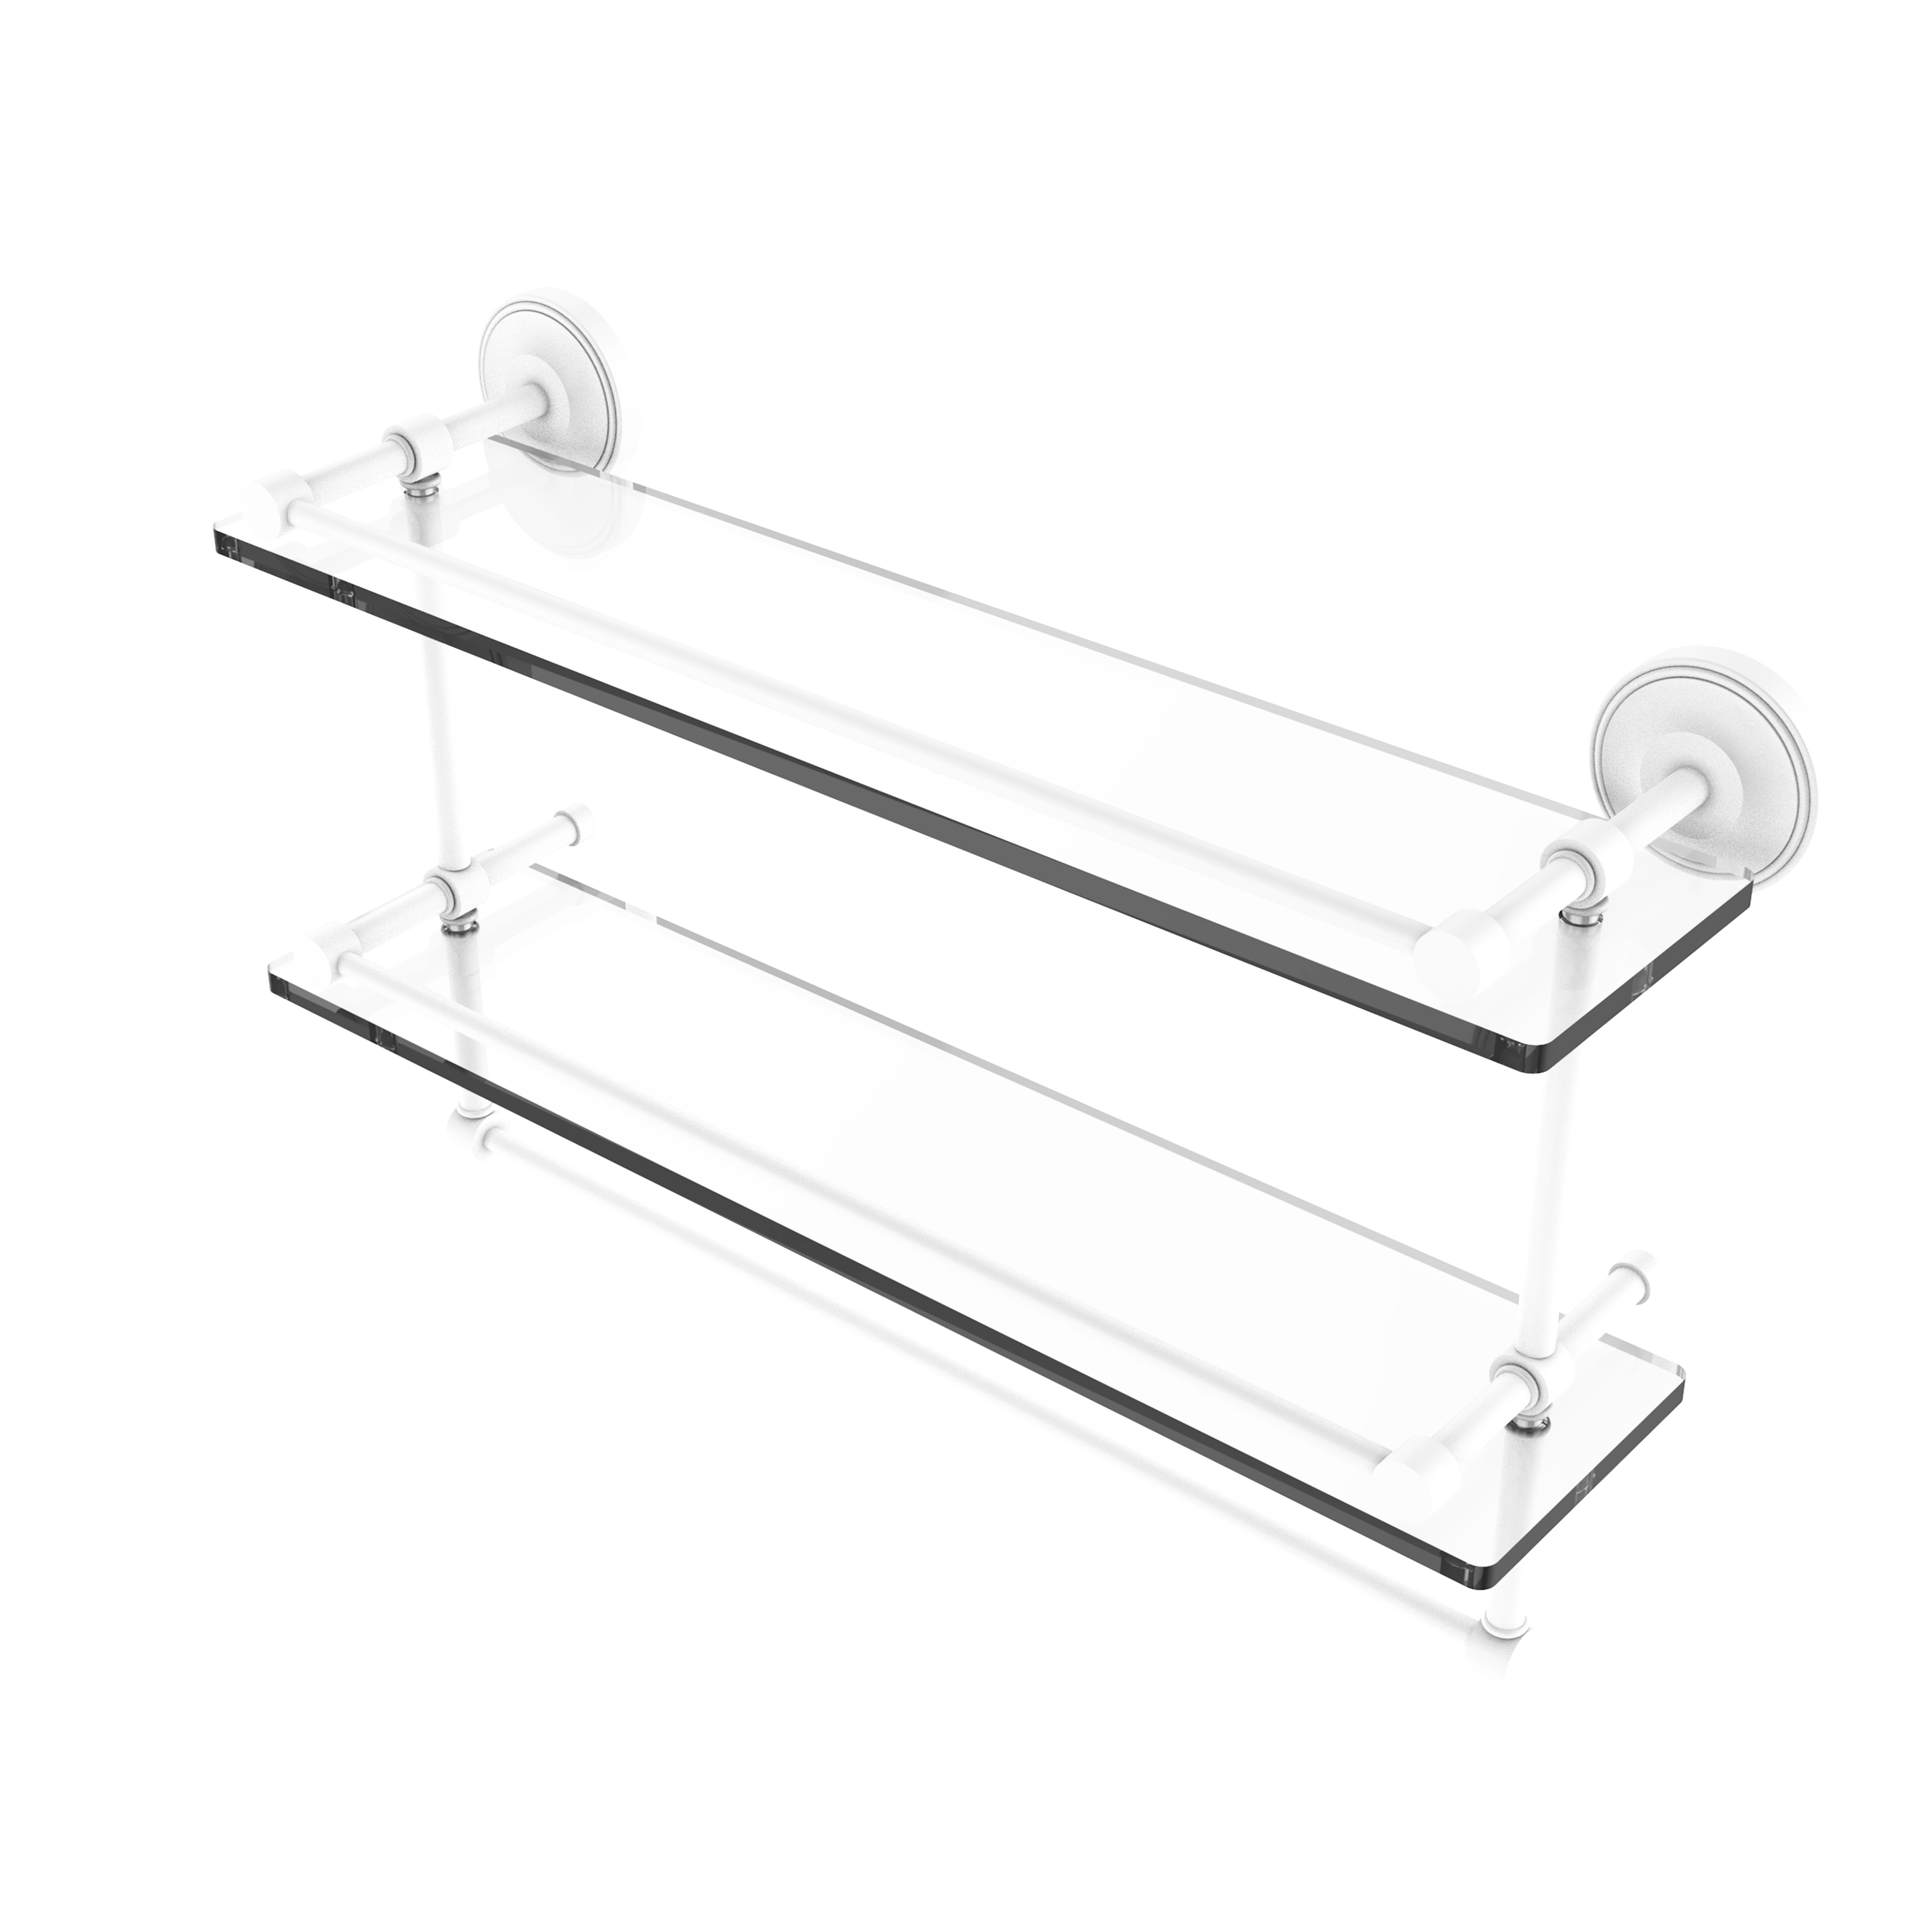 22 Inch Gallery Double Glass Shelf with Towel Bar - image 1 of 7